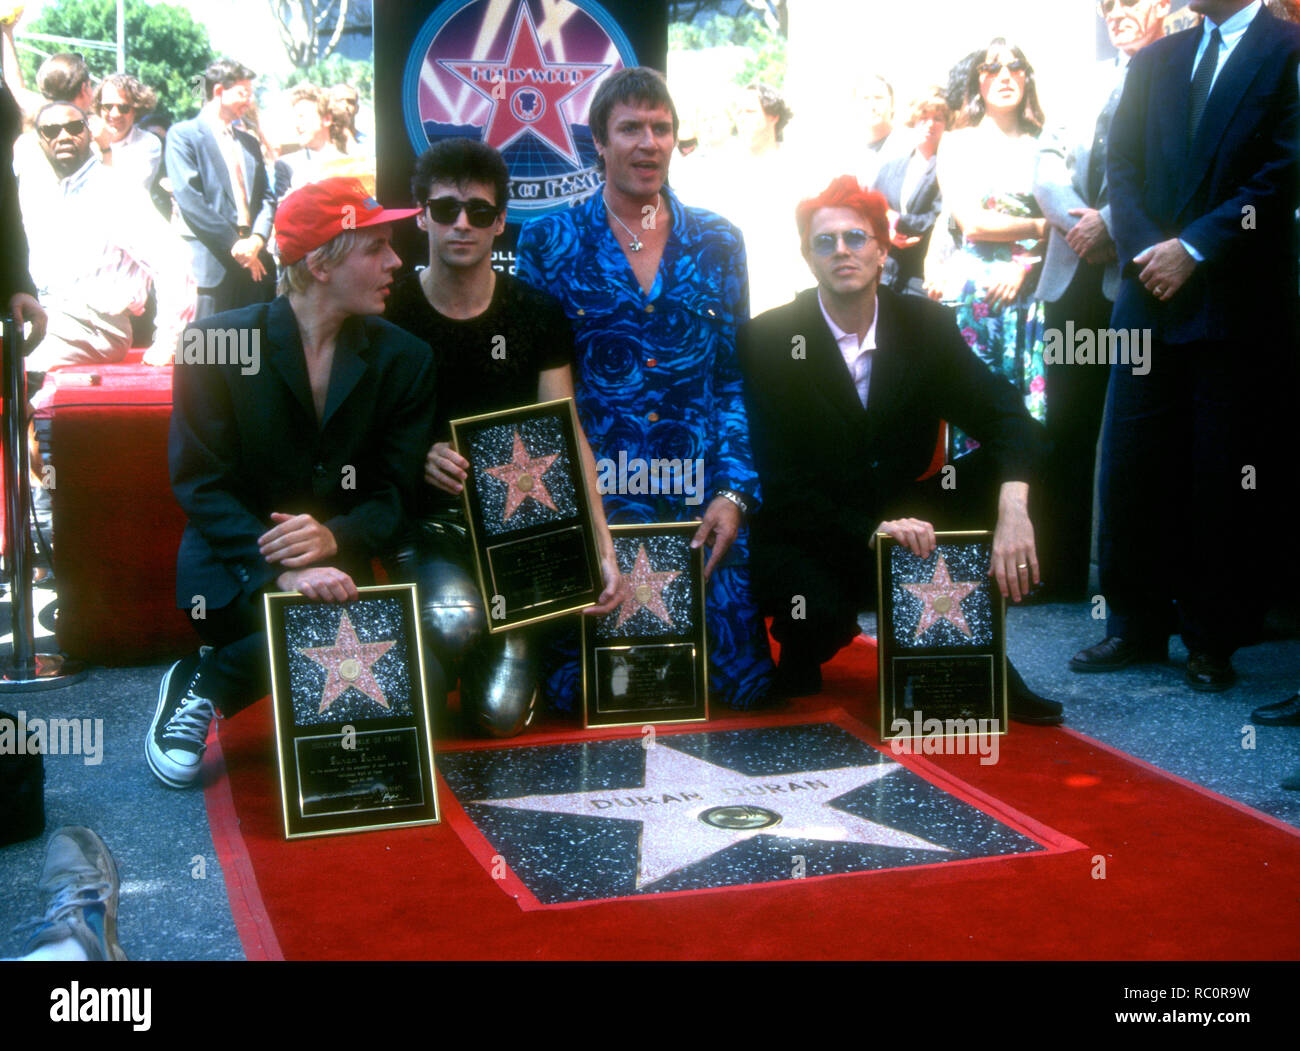 HOLLYWOOD, CA - AUGUST 23: Musicians/singers Nick Rhodes, Warren Cuccurullo, Simon Le Bon and John Taylor of Duran Duran attend the Hollywood Walk of Fame Ceremony Honoring Duran Duran with a Walk of Fame Star on August 23, 1993 at 1770 Vine Street in Hollywood, California. Photo by Barry King/Alamy Stock Photo Stock Photo